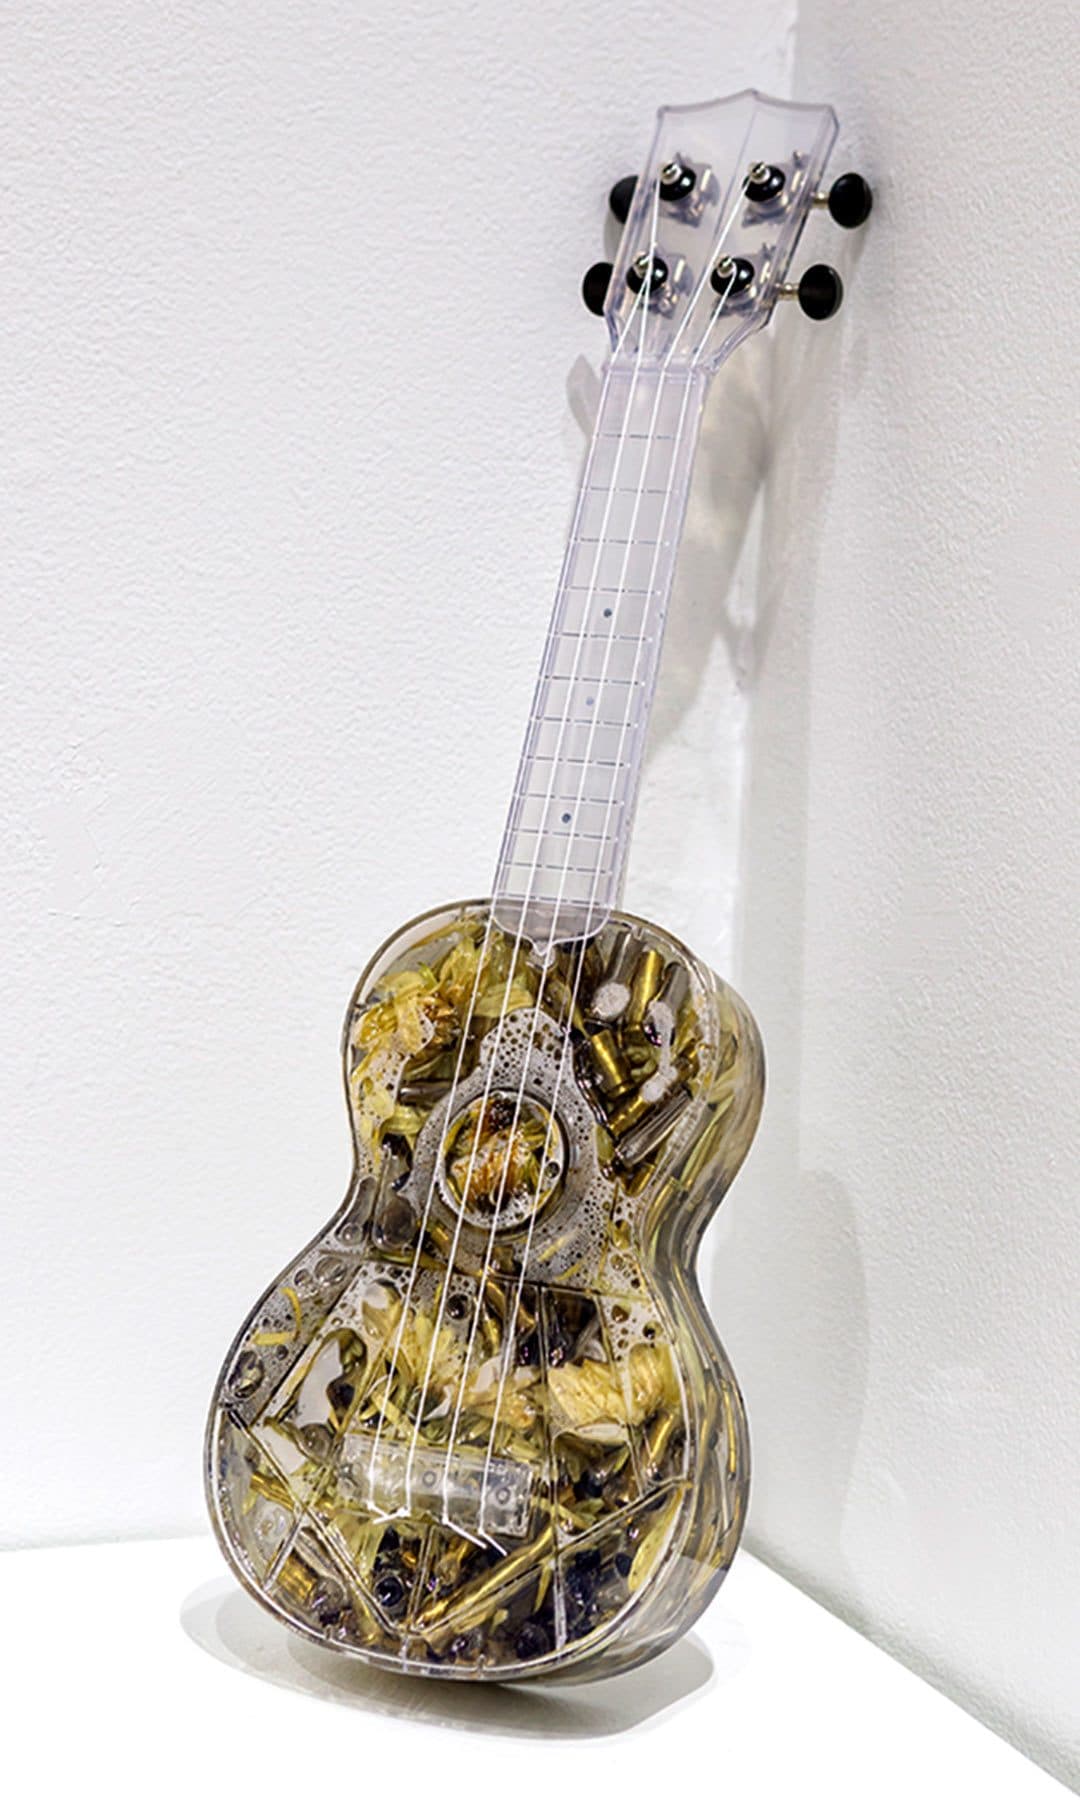 ukulele filled with shell casings and flowers